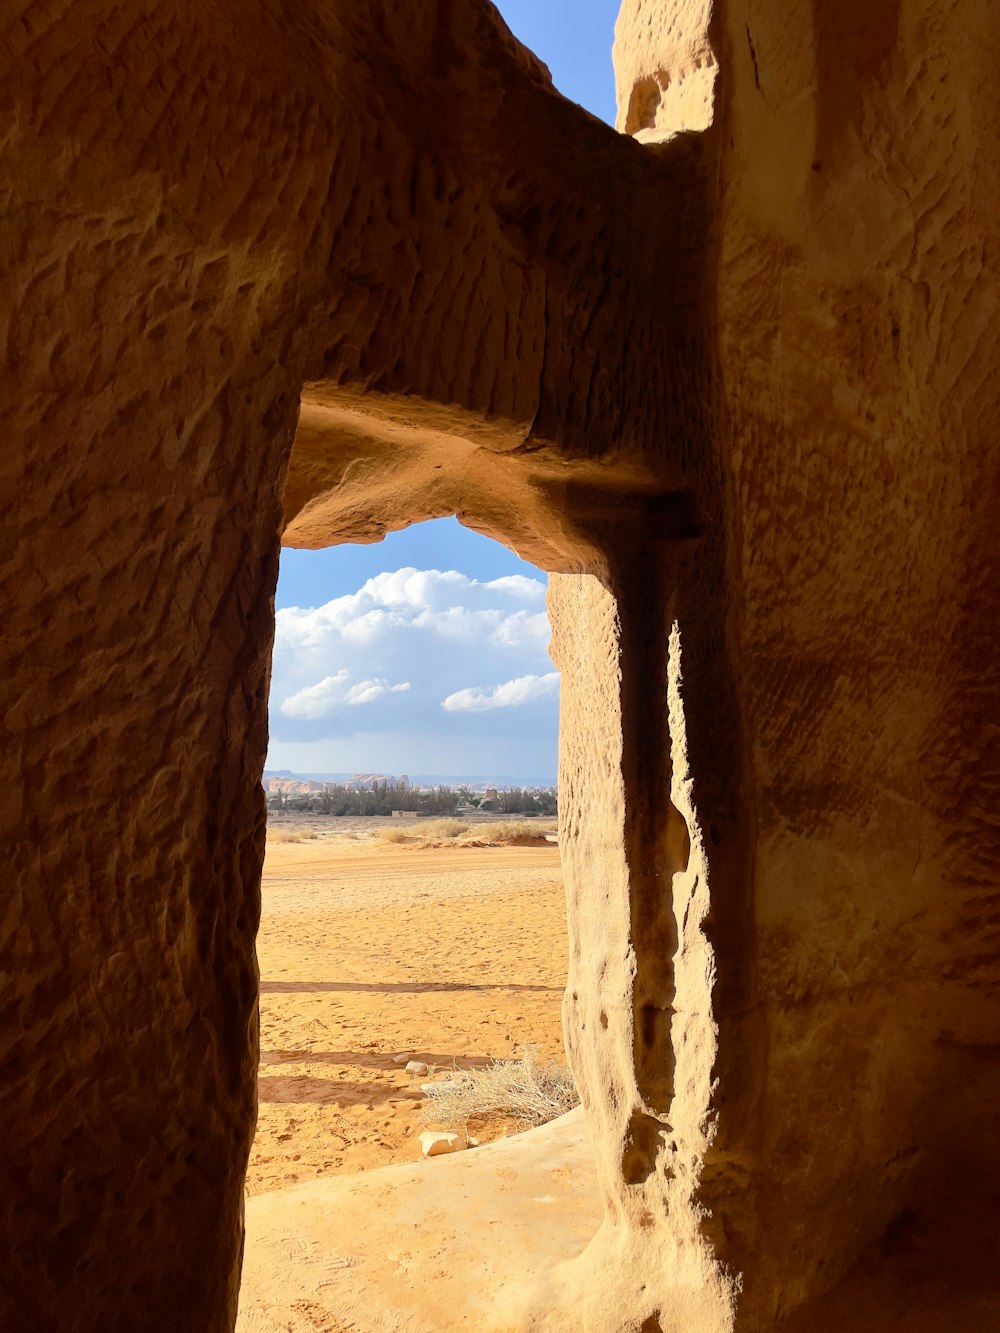 a view of a desert through a small opening in a rock wall